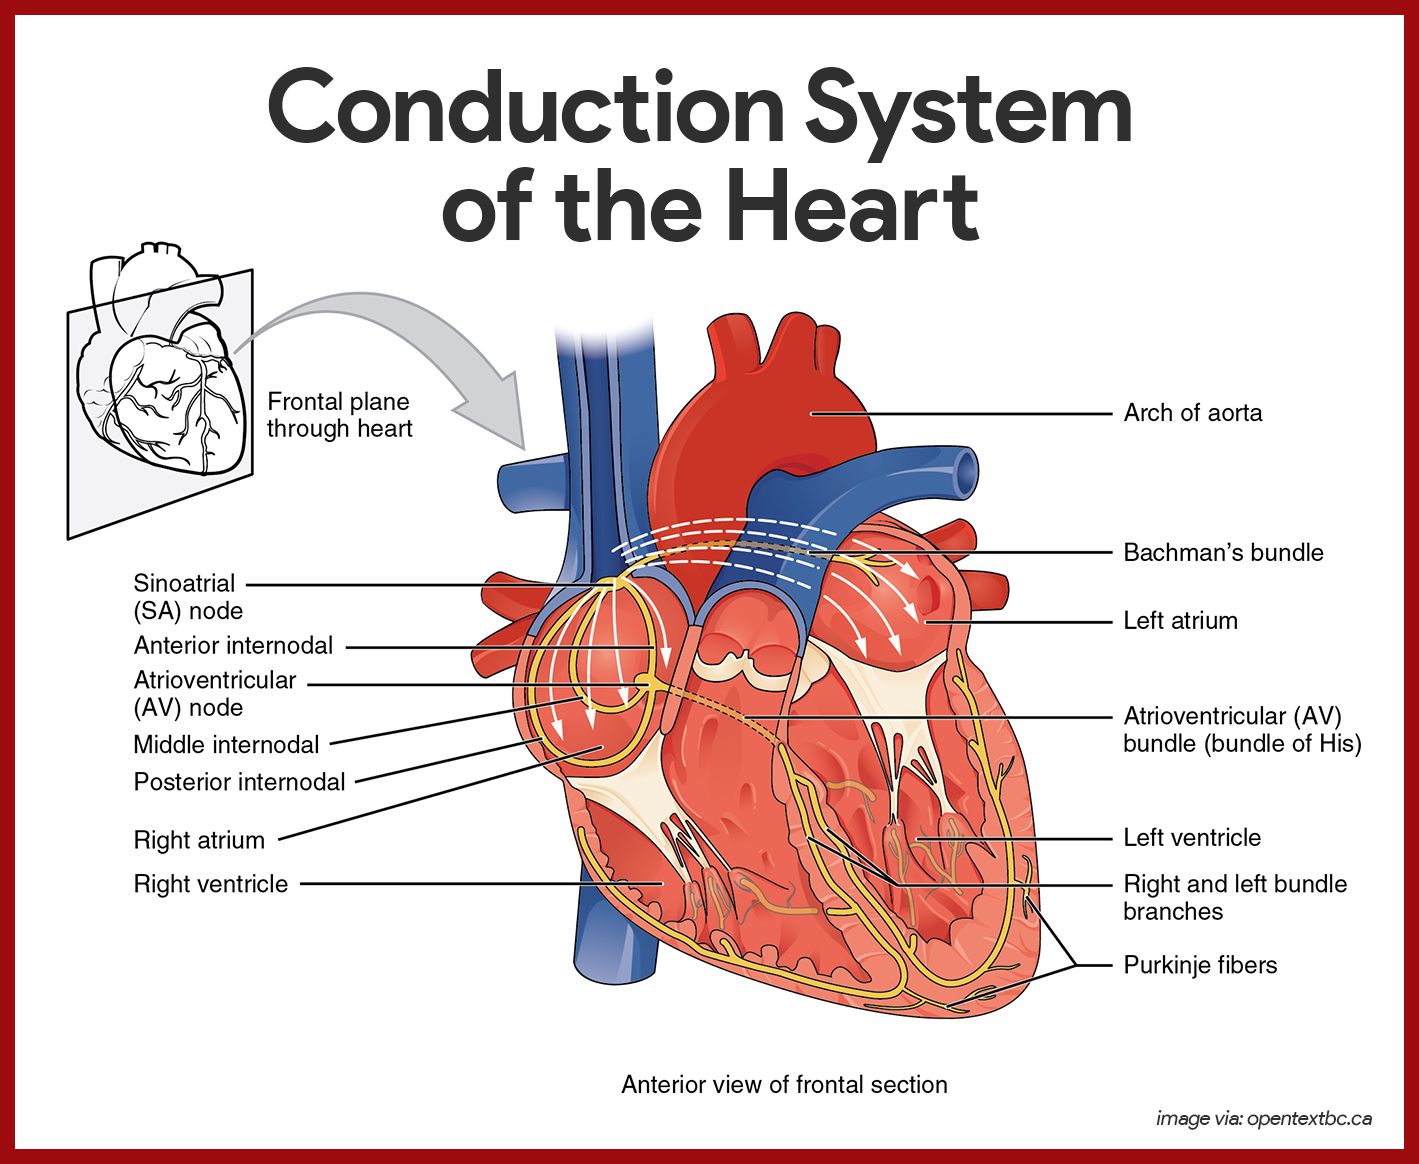 Cardiovascular System Anatomy And Physiology Study Guide For Nurses 